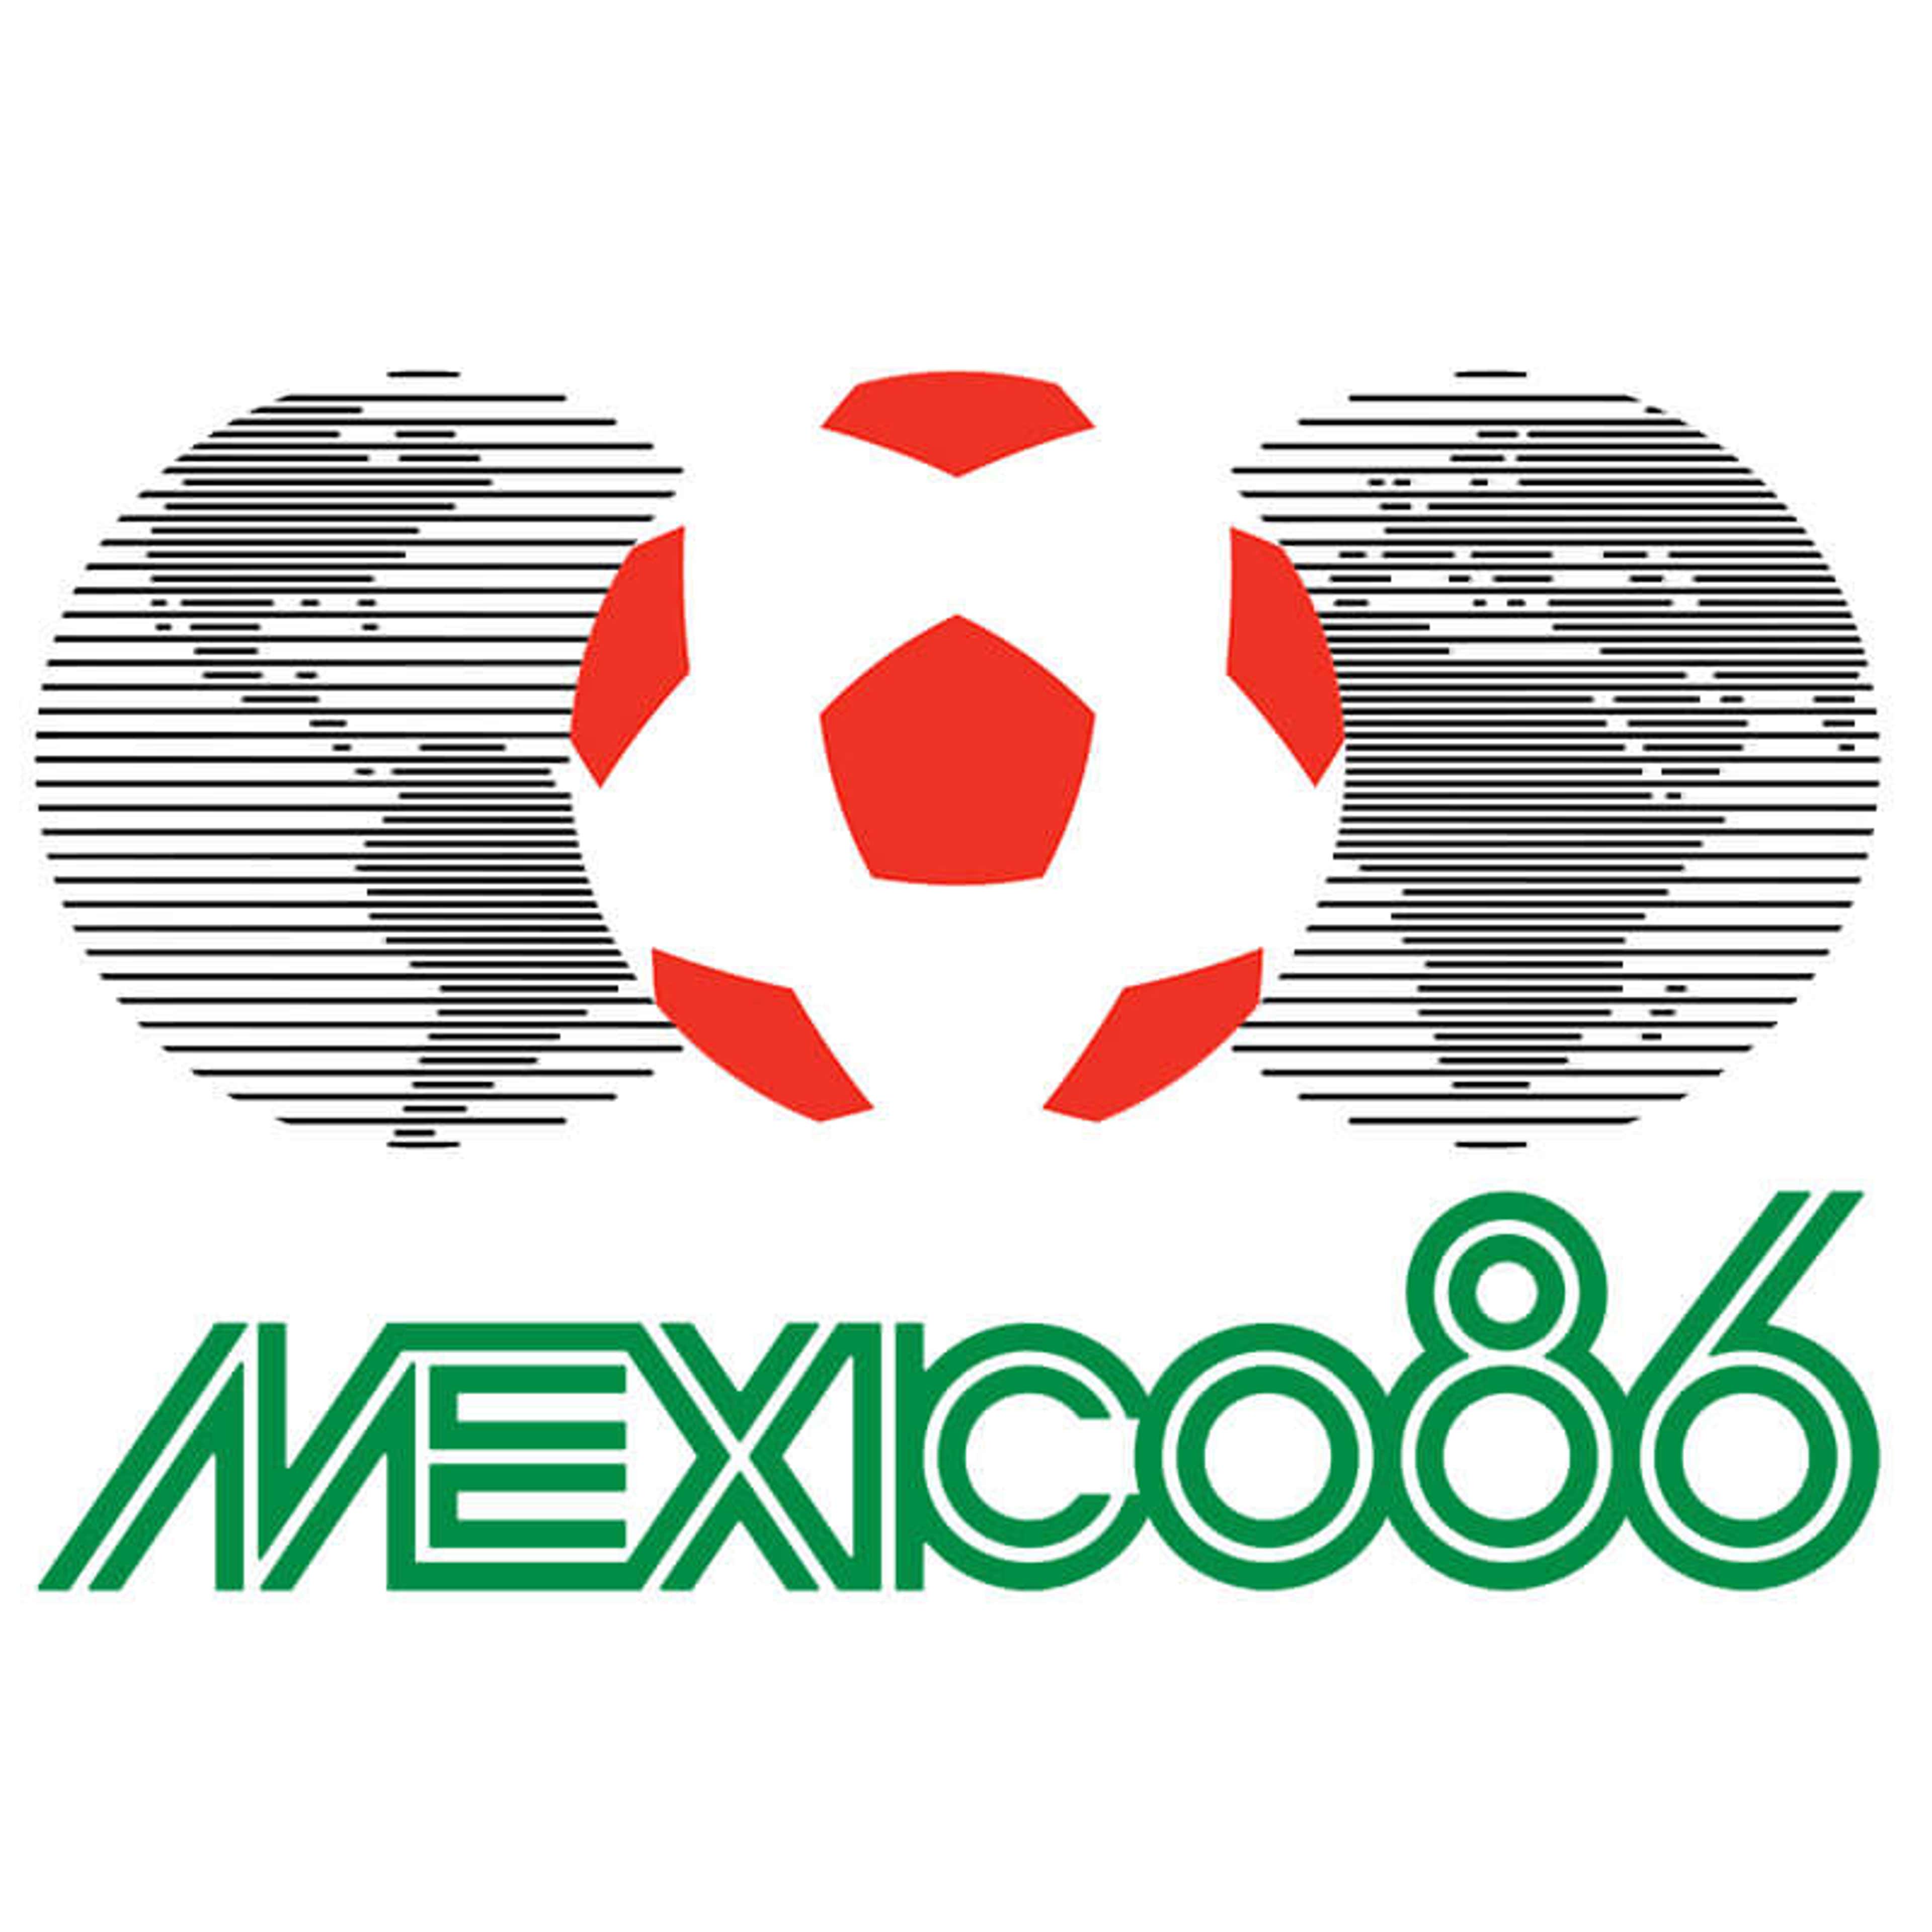 FIFA World Cup Logos: All the designs from 1930-2022